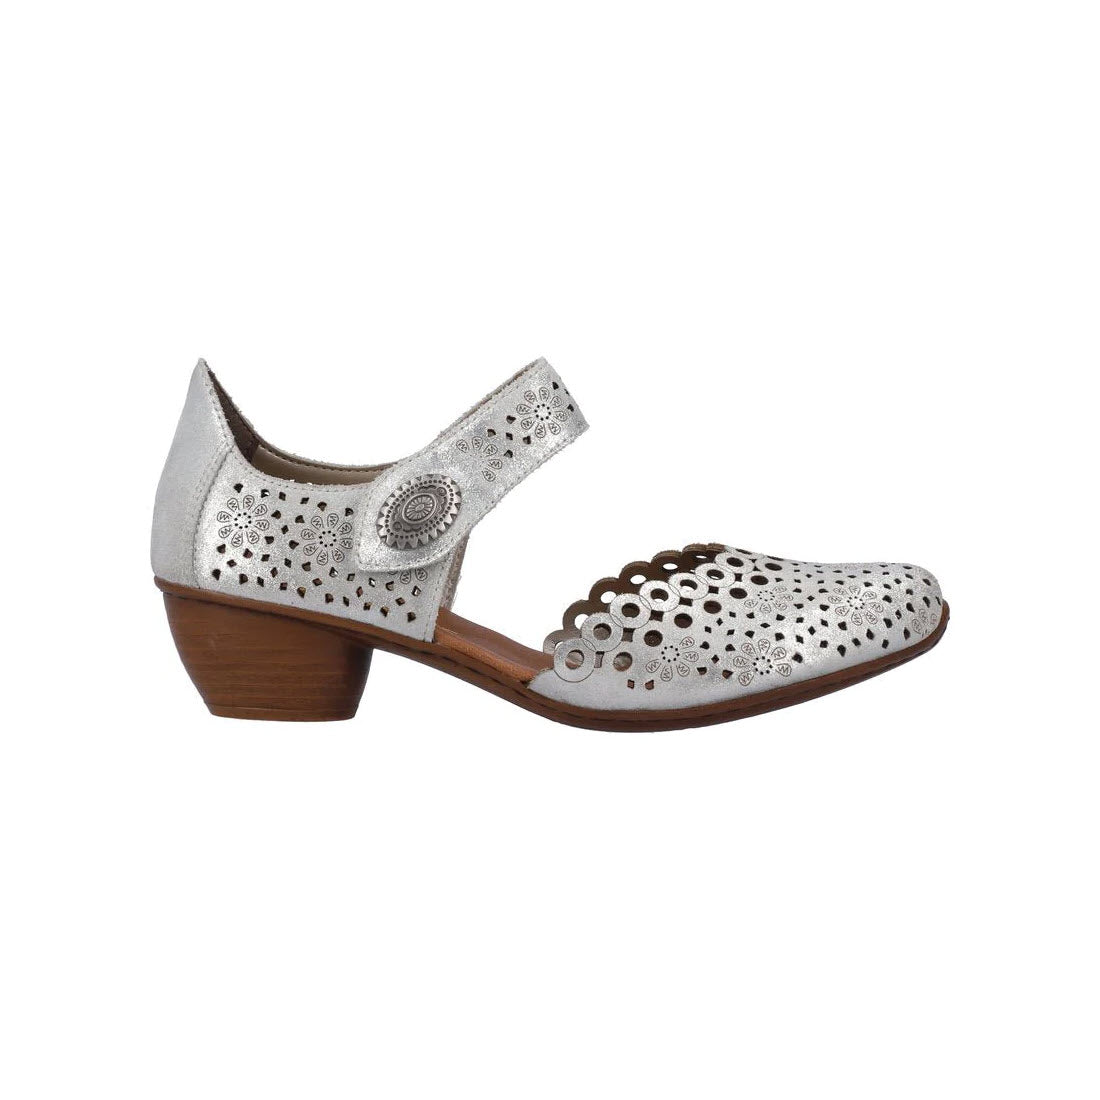 Rieker silver leather mary jane shoe with an adjustable ankle strap, decorative perforations, and a low wooden heel, isolated on a white background.